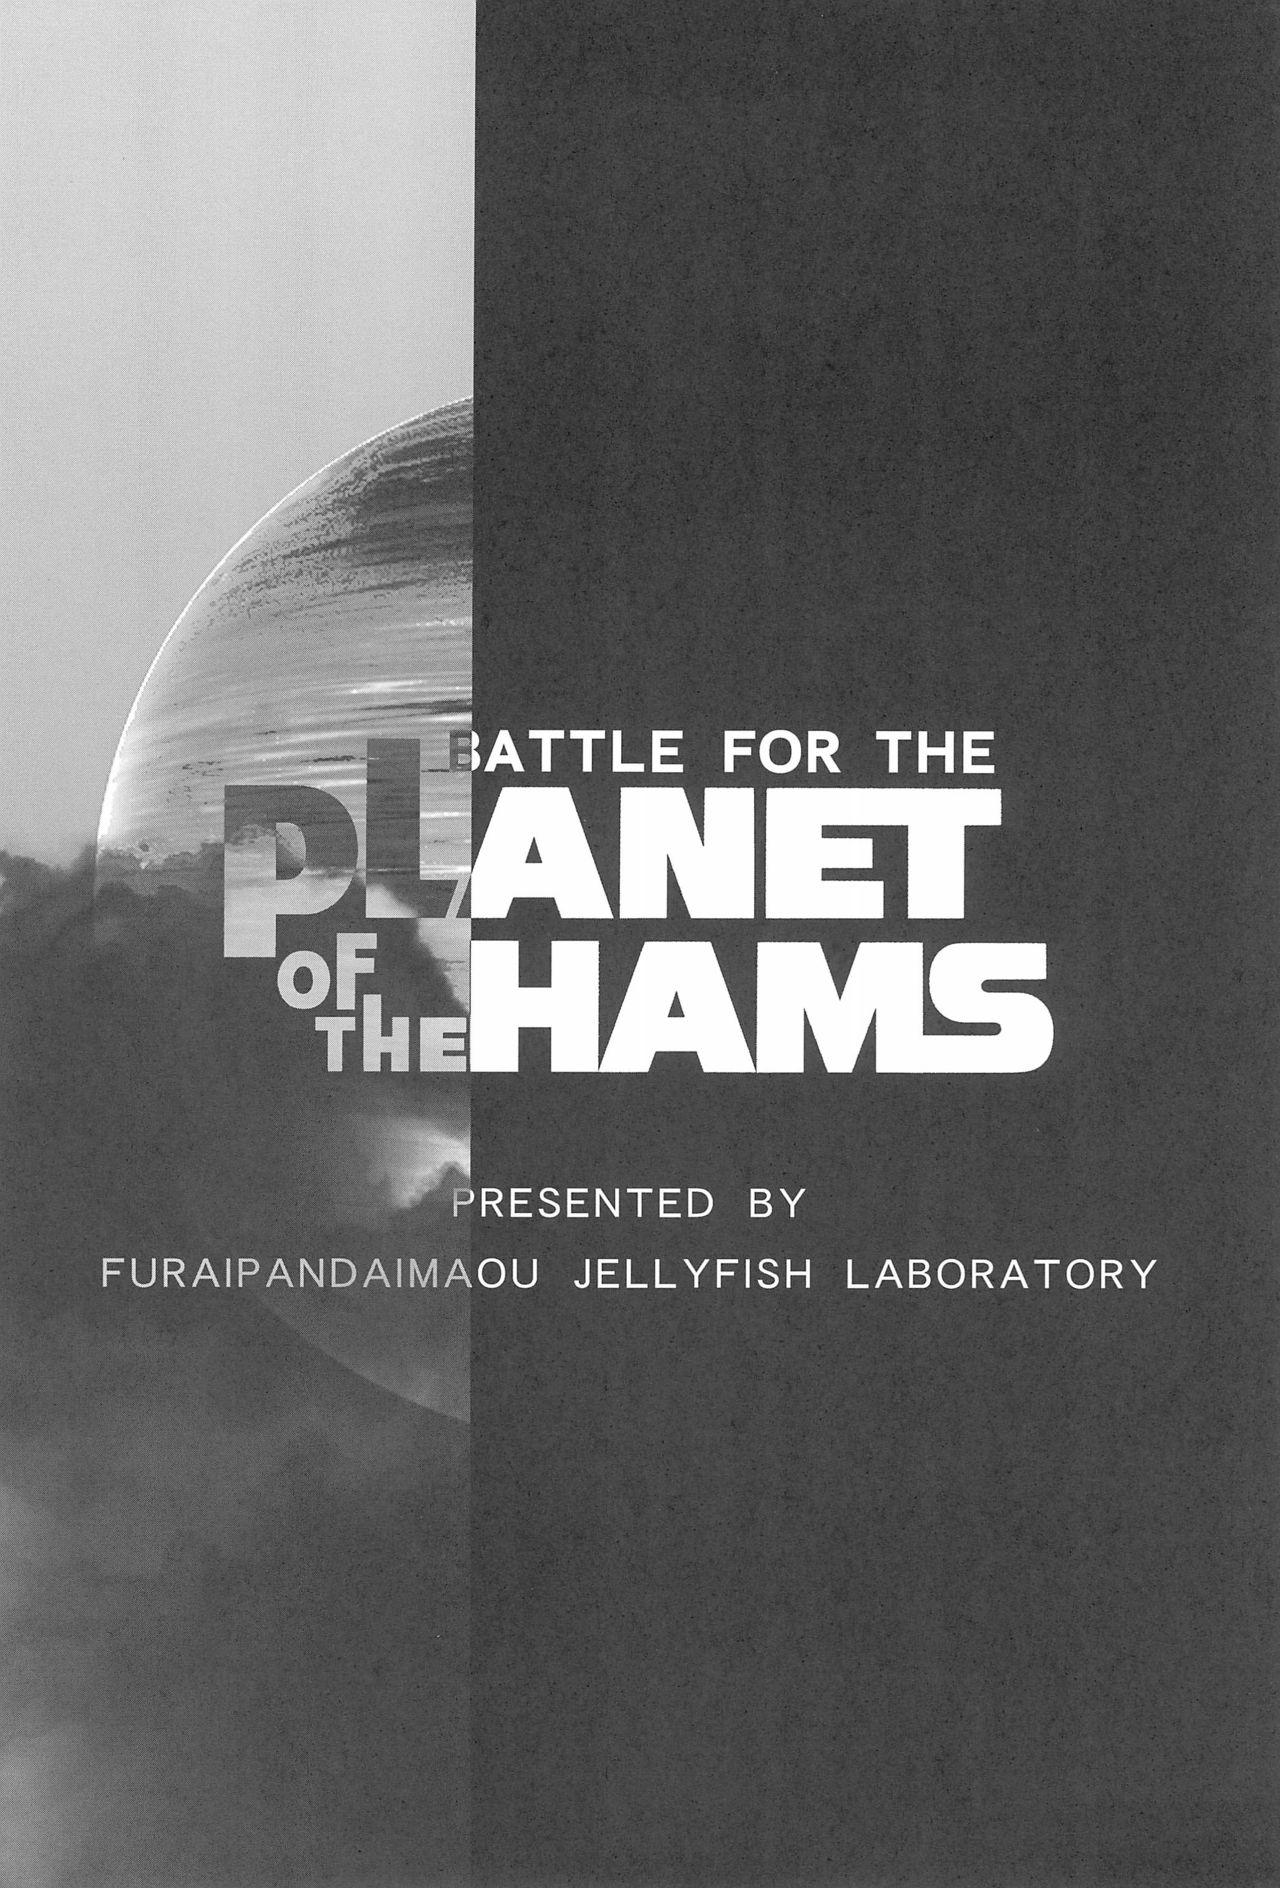 BATTLE FOR THE PLANET OF THE HAMS 31